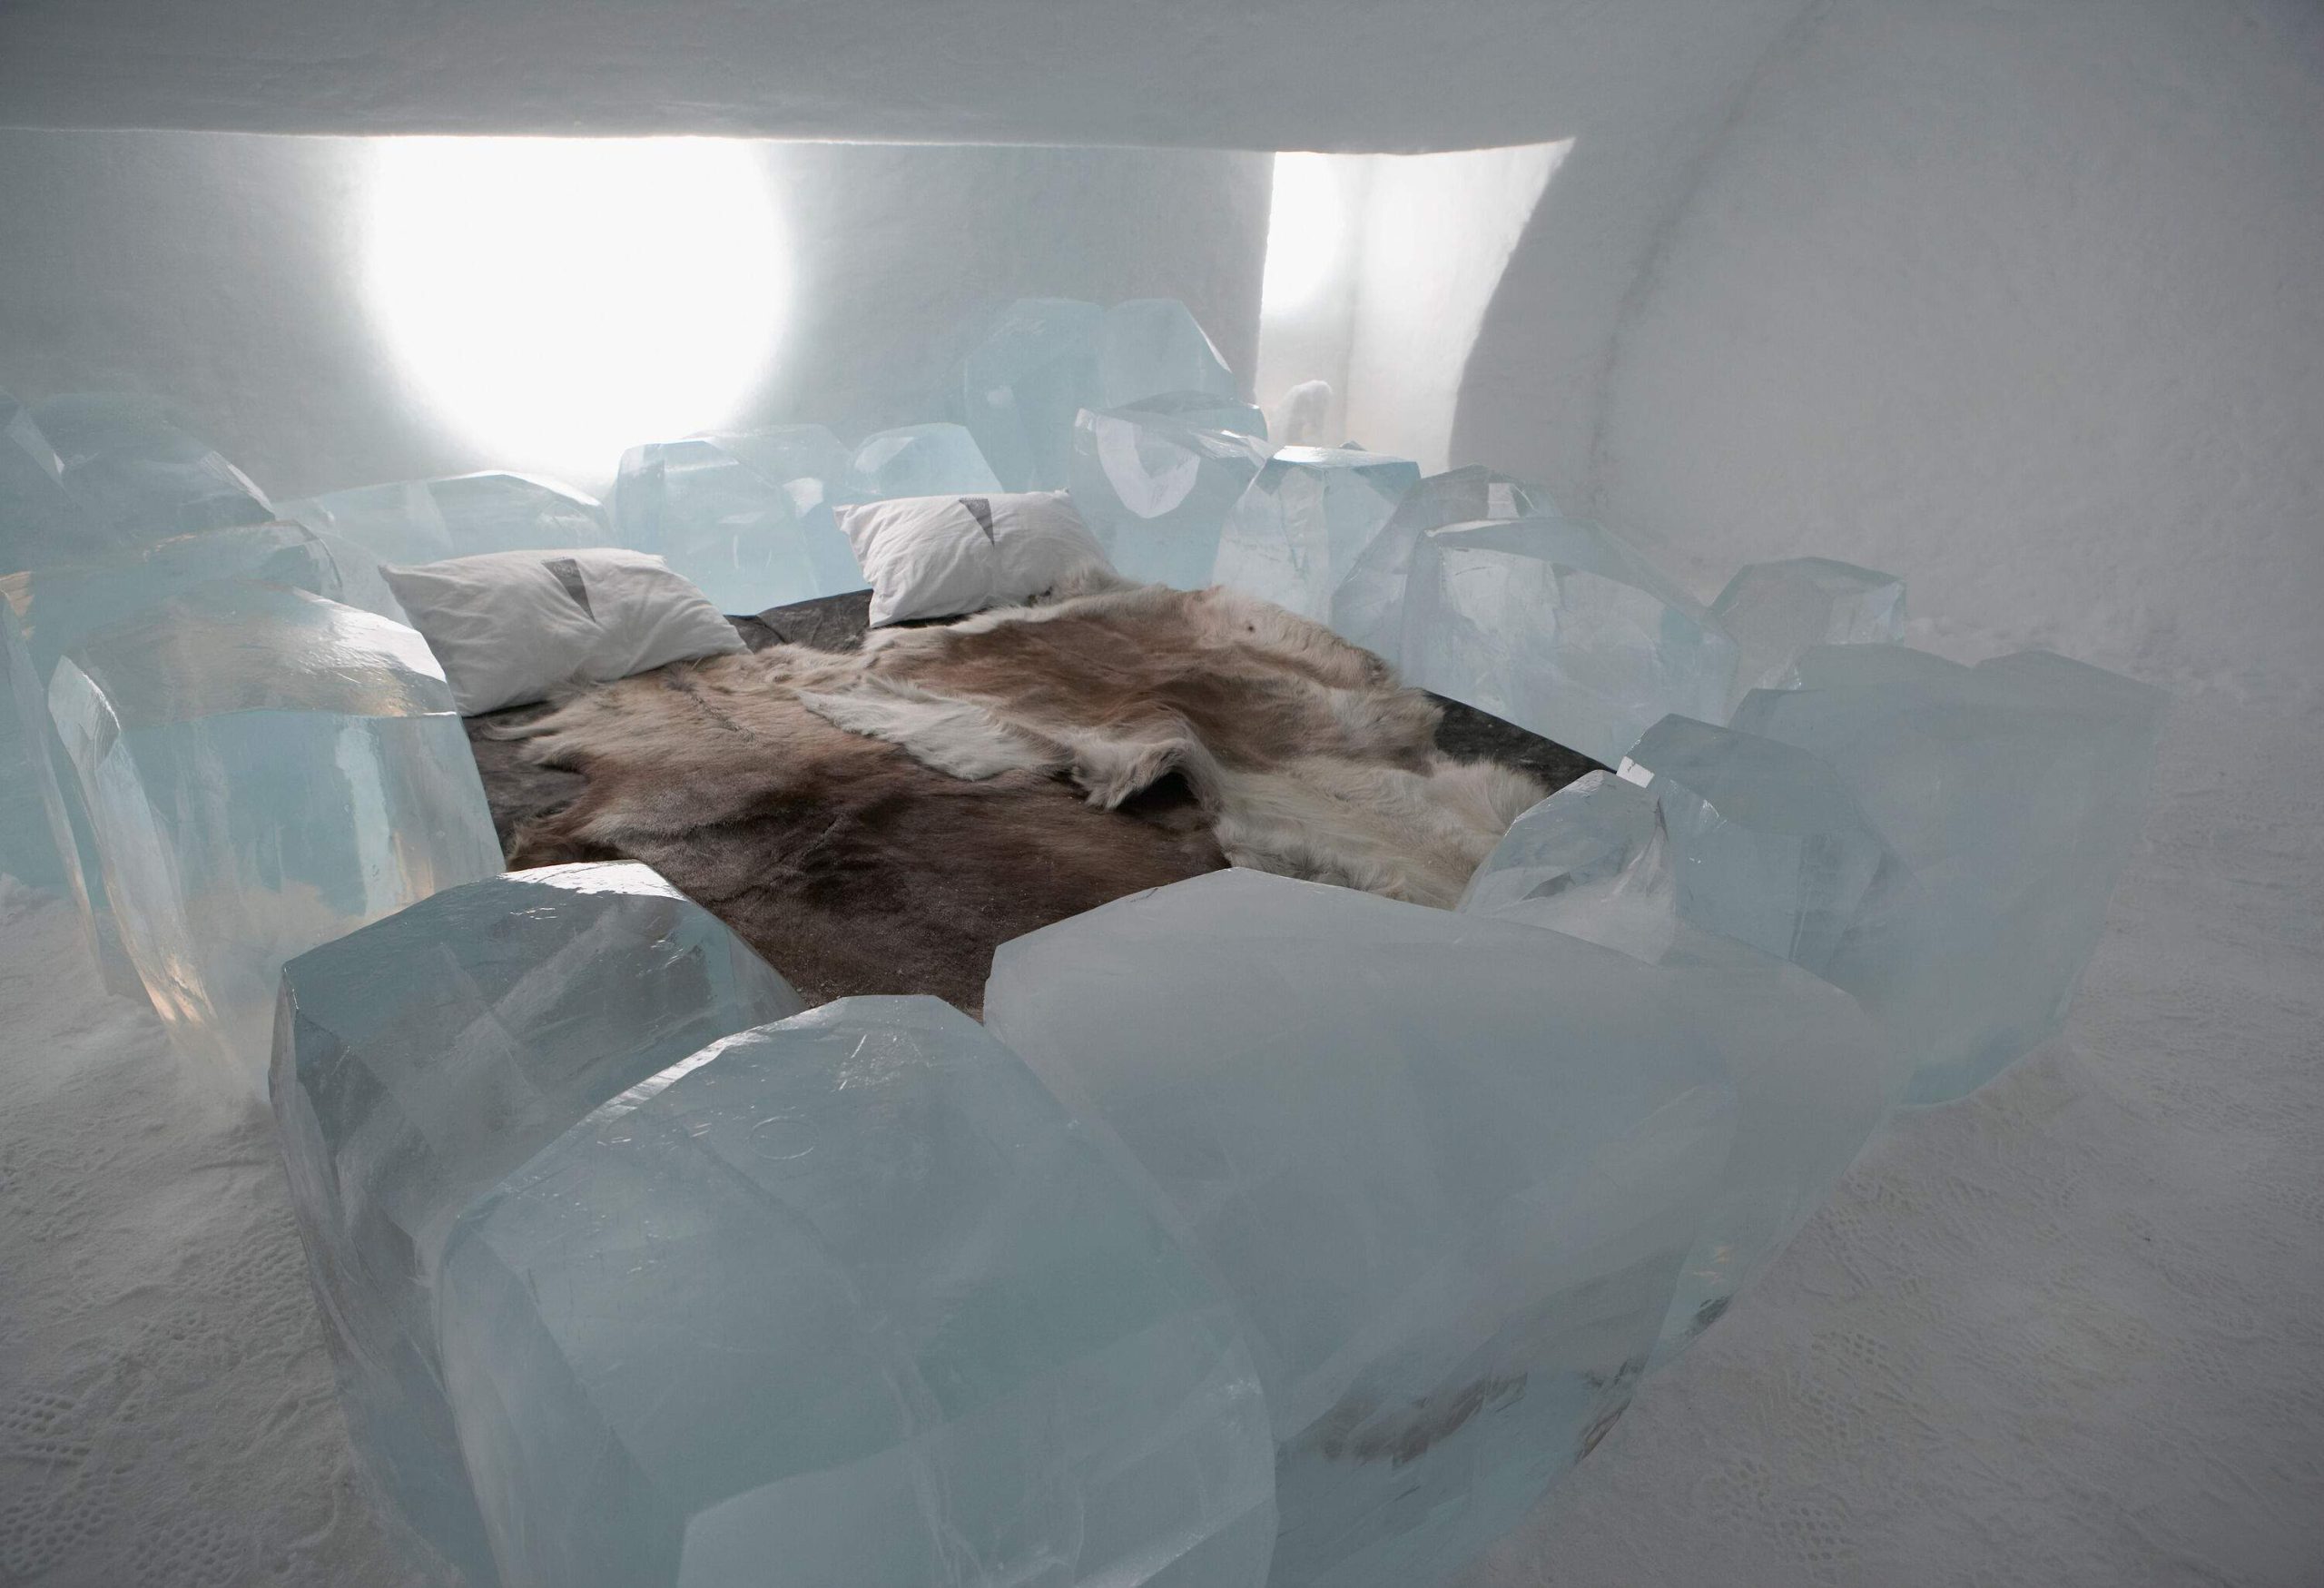 A bedroom set in ice, complete with a bed and chunks of ice all around it.